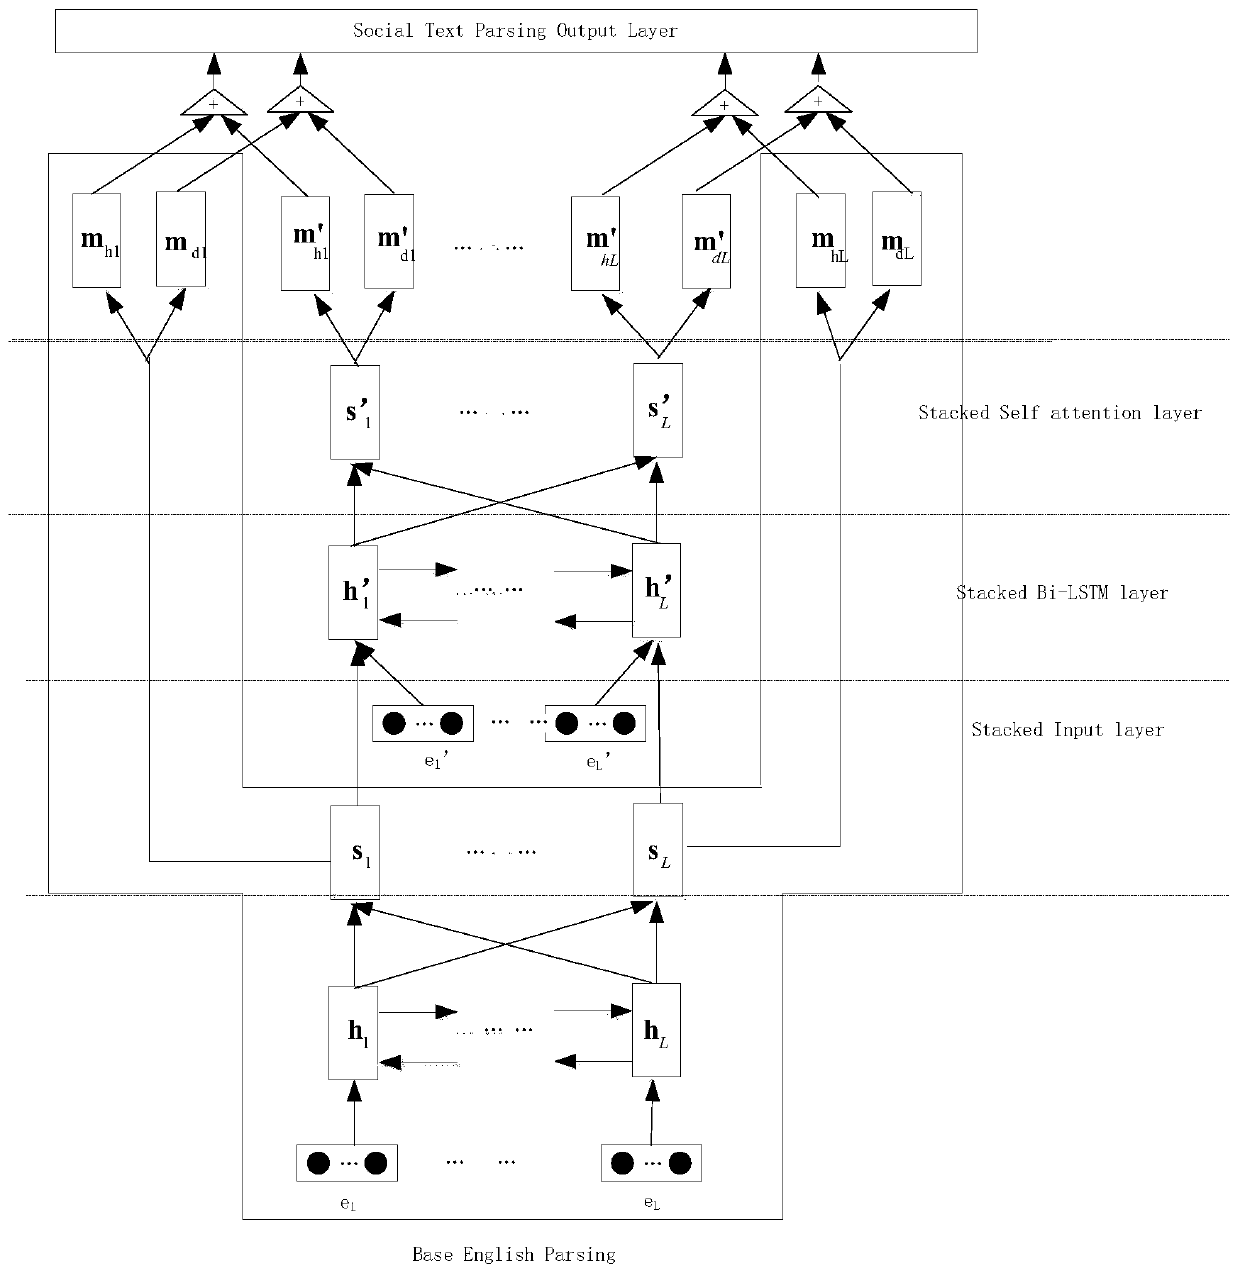 Social text dependency syntactic analysis system based on deep neural network